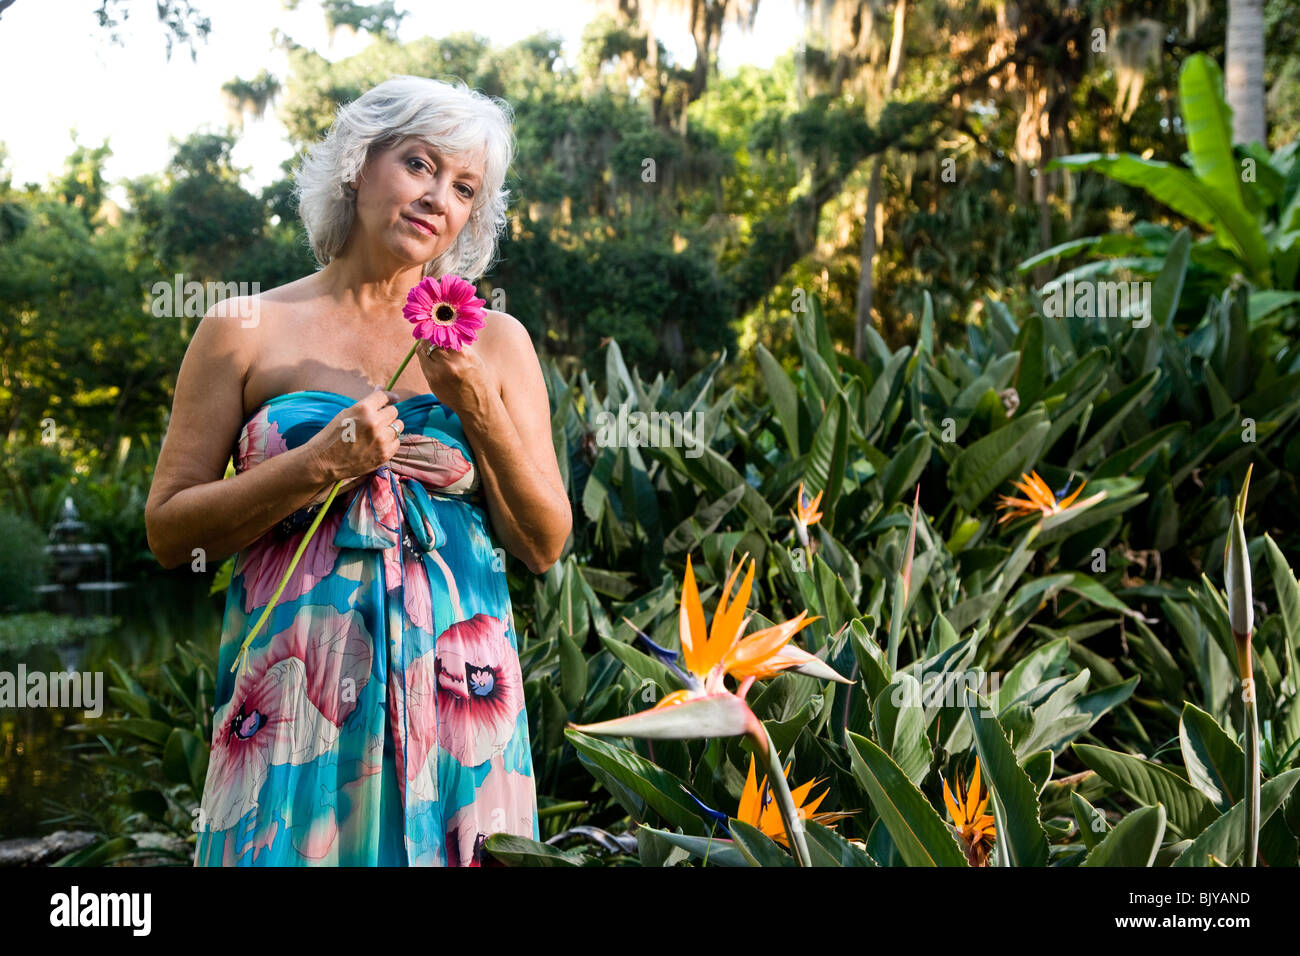 Sexy mature woman in strapless dress standing in tropical garden Stock  Photo - Alamy